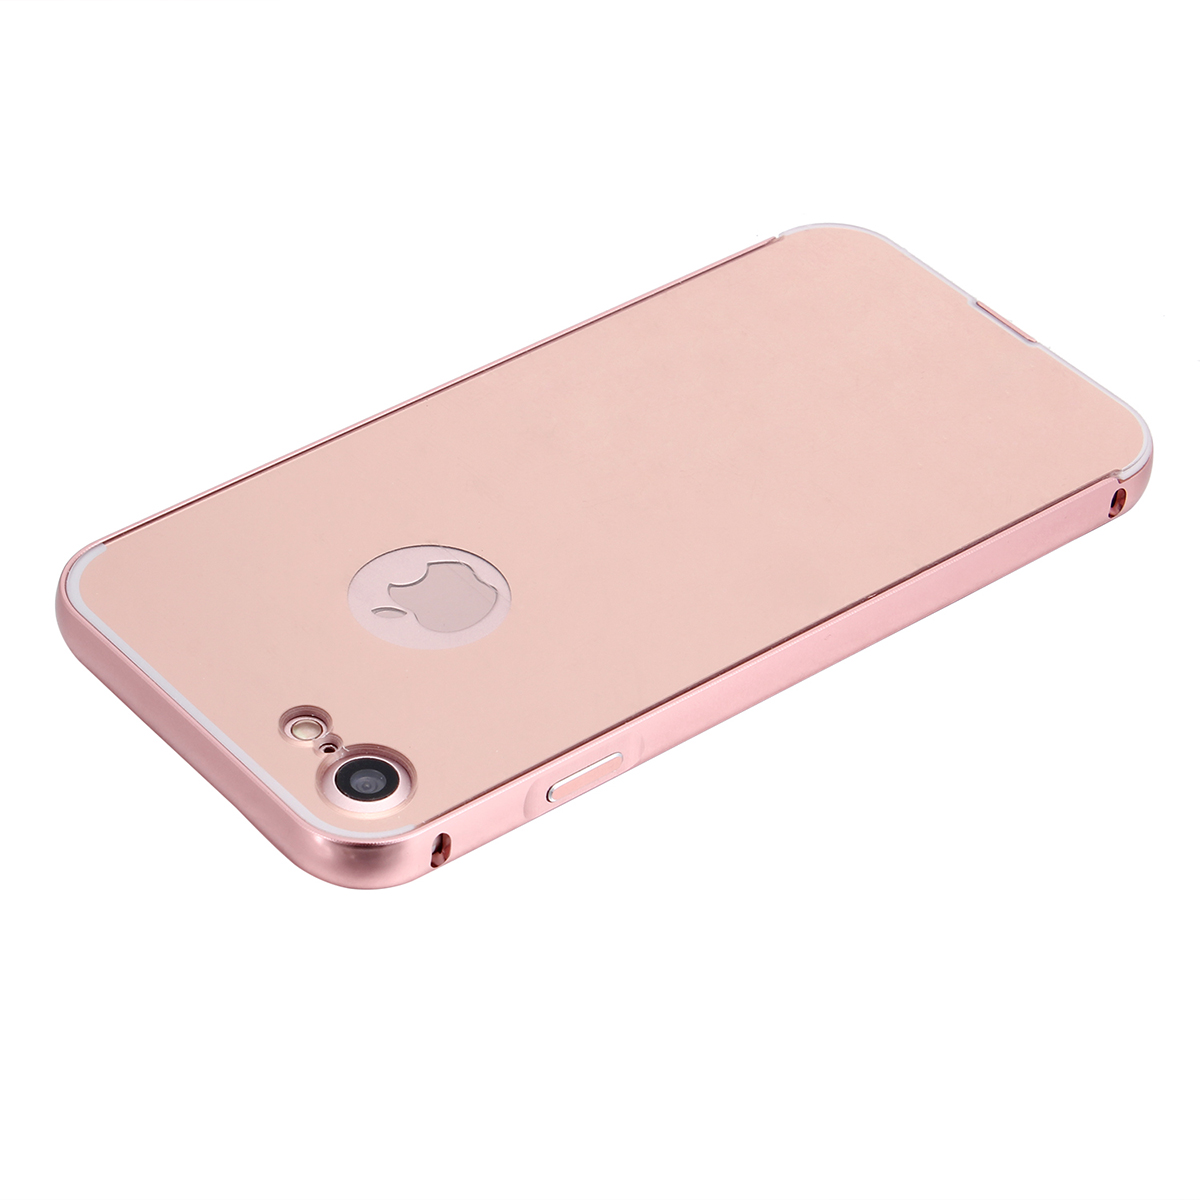 Aluminum Metal Frame + Back PC Mirror Cover Case for iPhone 7/8 - Rose Gold